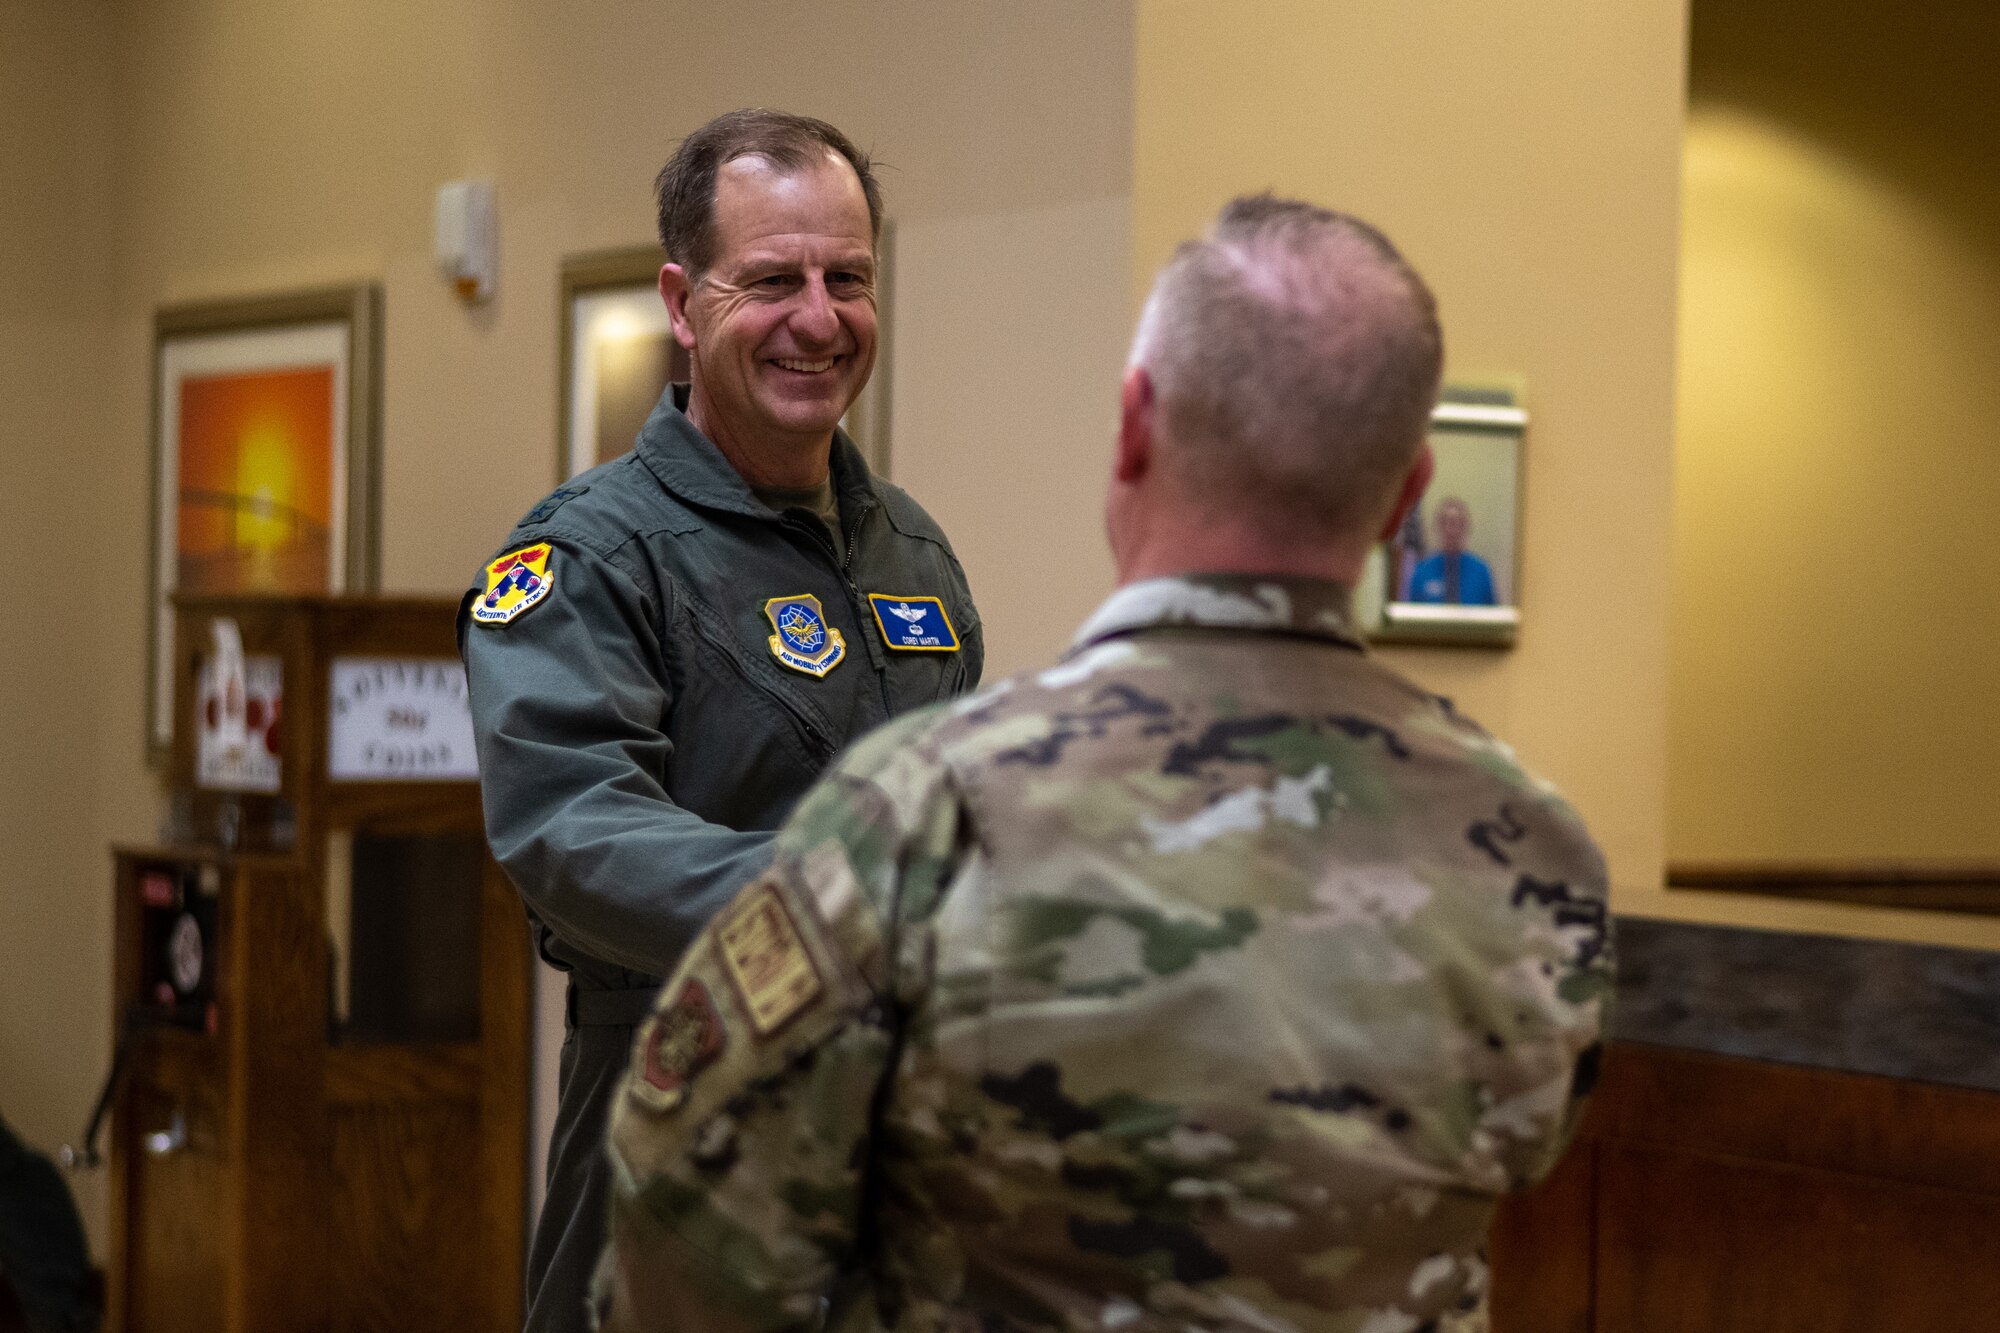 During his visit, the 18th AF command team inspected the installation’s new dorms, discussed crew manning and spoke with junior enlisted Airmen. (U.S. Air Force photo by Airman 1st Class Zachary Foster)